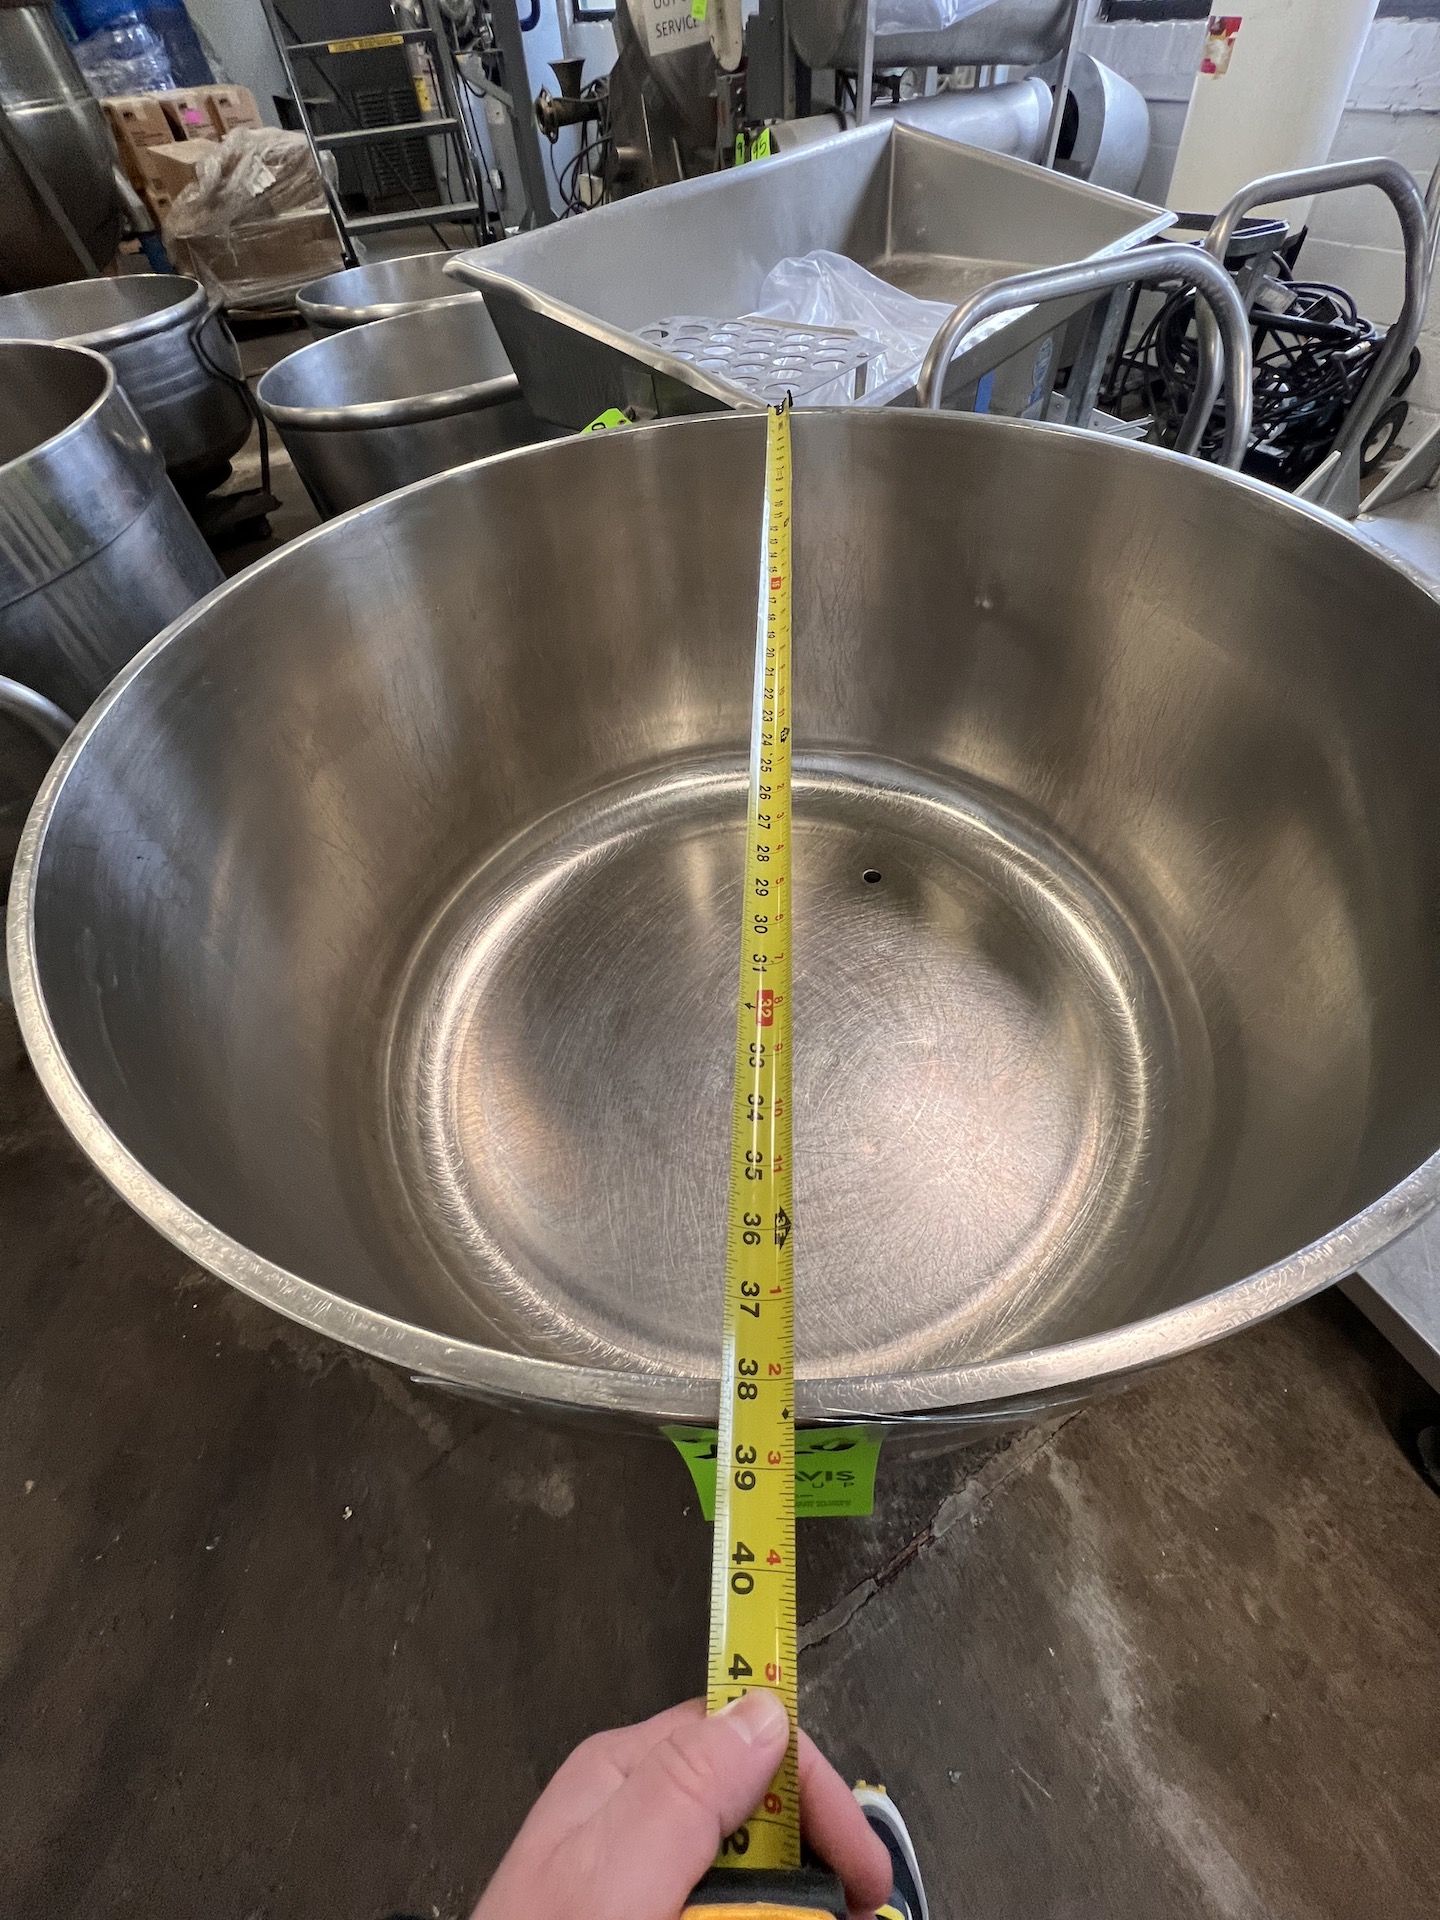 PORTABLE S/S MIXING BOWL FOR SPIRAL MIXERS, APPROX. 38 IN. W X 19 IN. D - Image 4 of 5